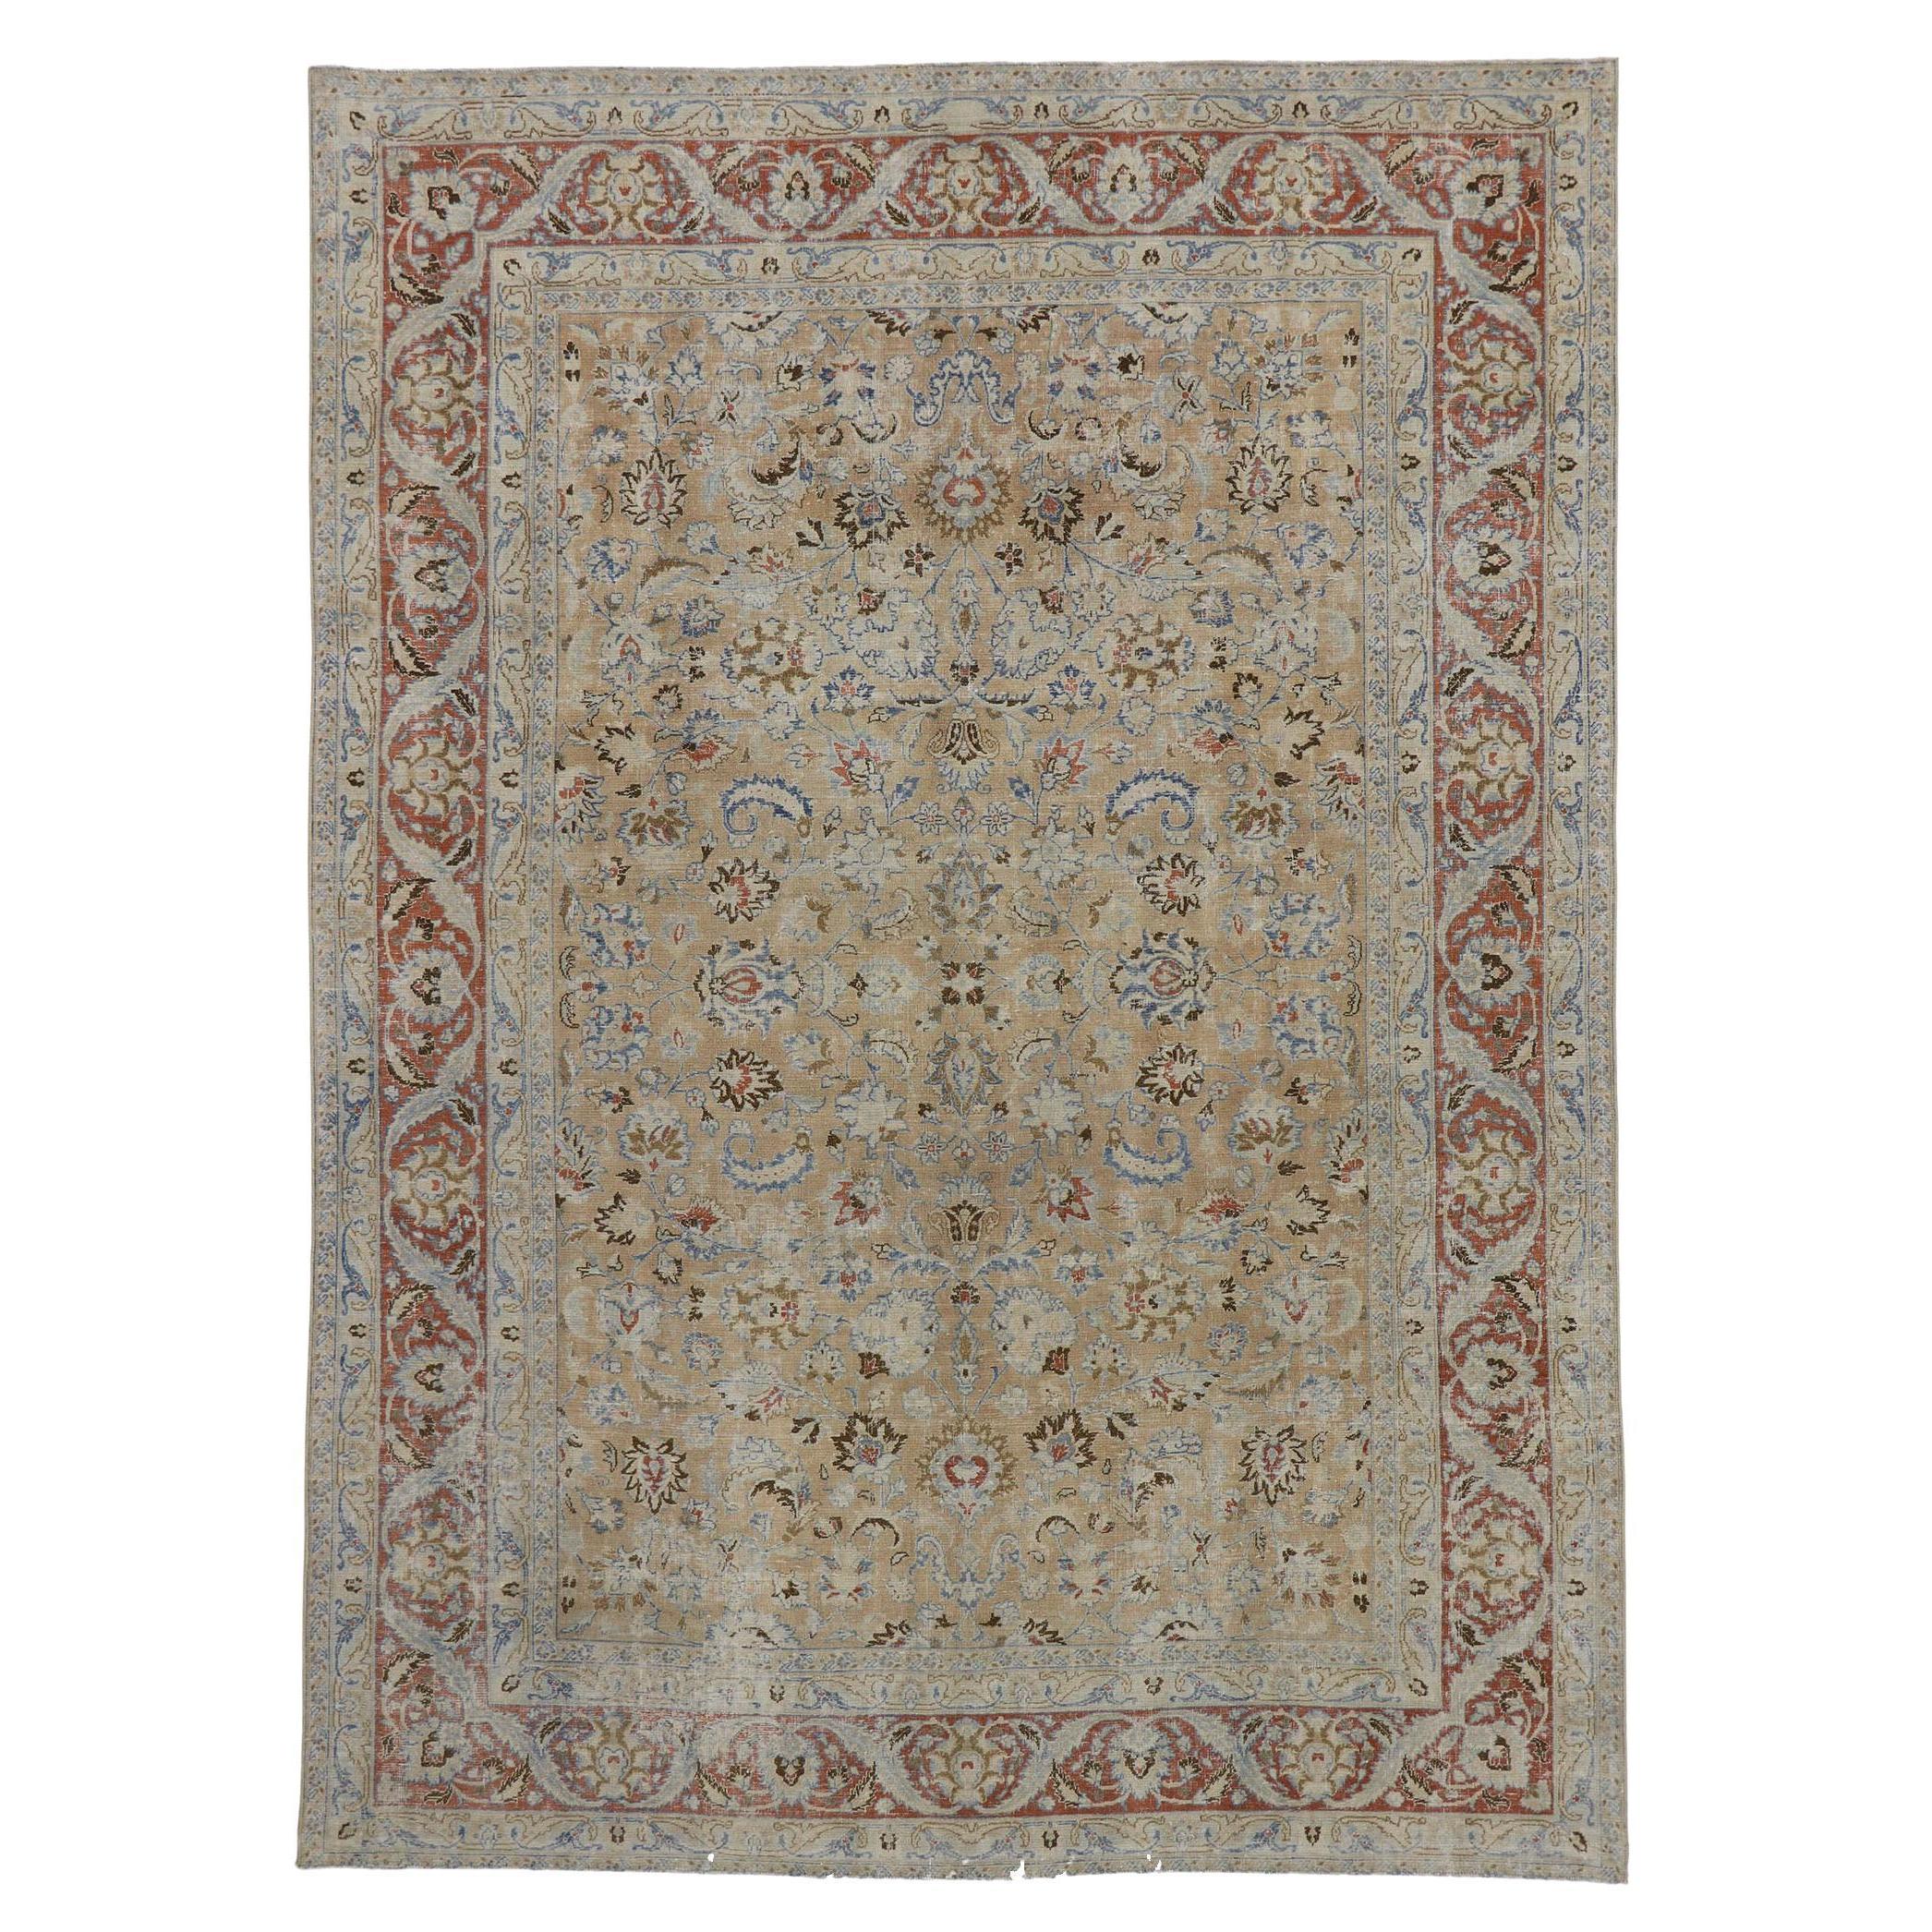 Distressed Antique Persian Mood Rug with Rustic Style